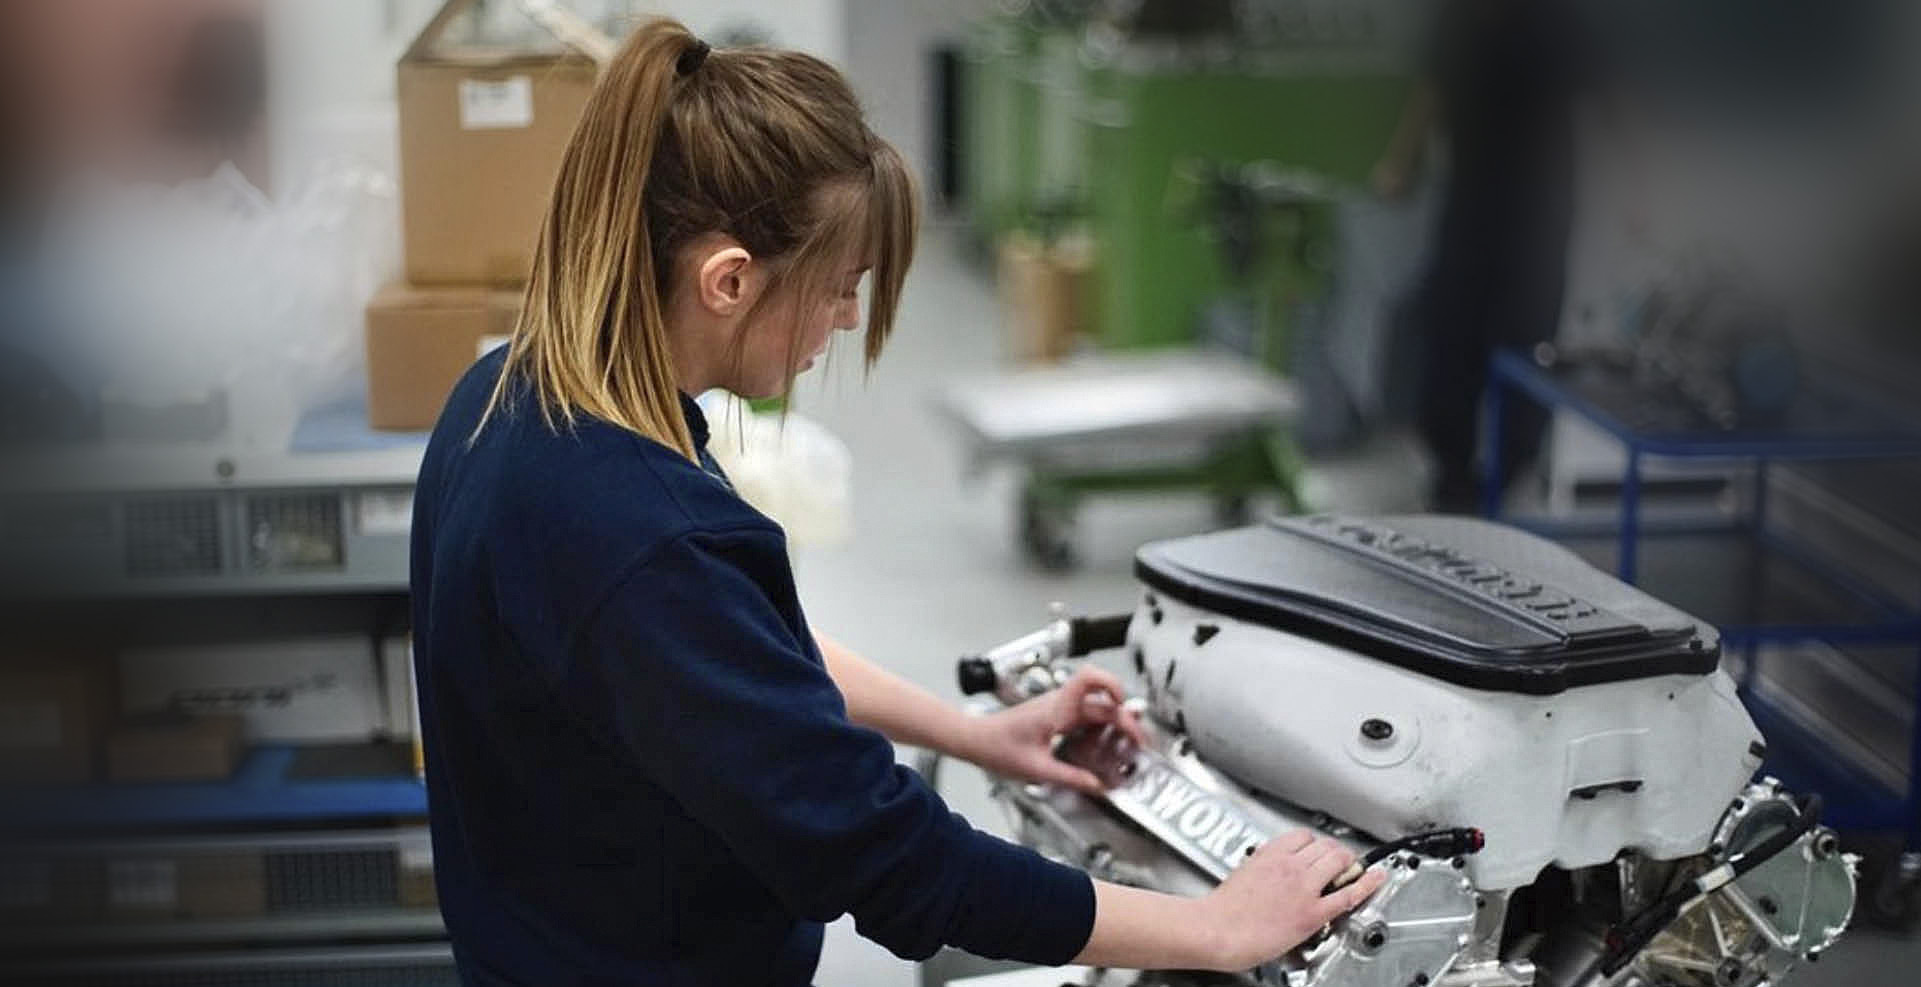 Careers at Cosworth